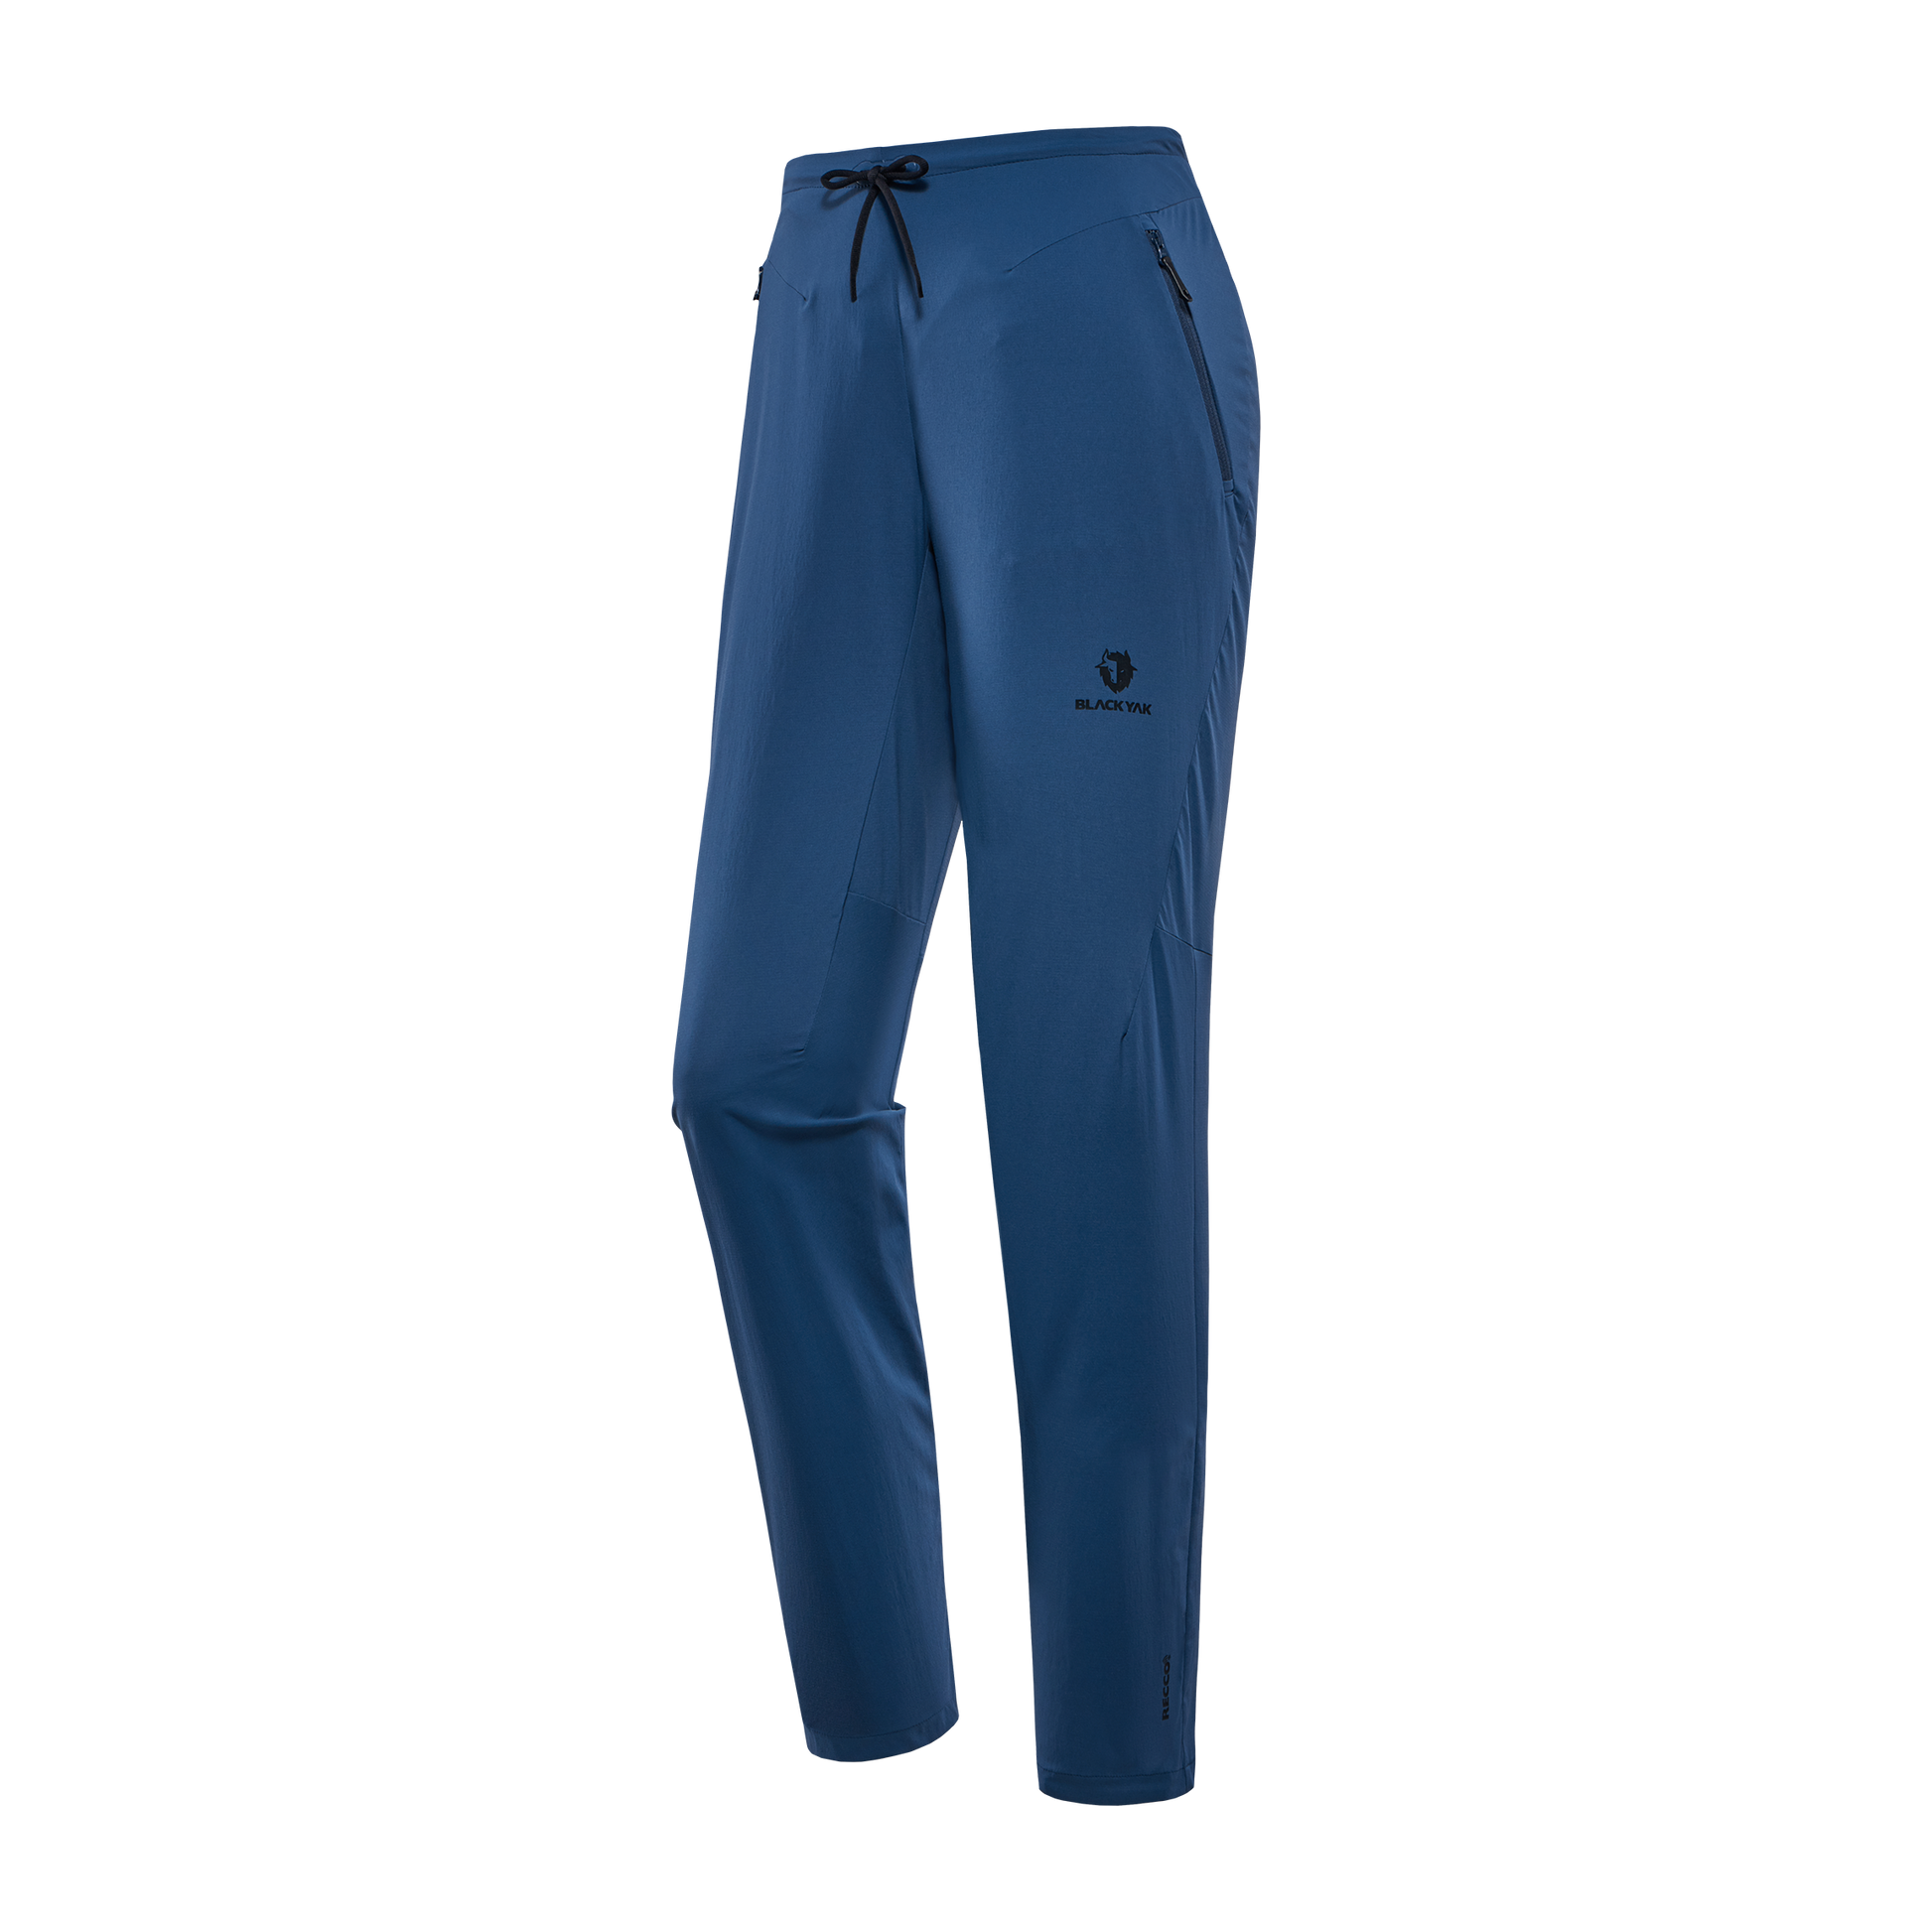 Women's Performance Pants That Actually Have Pockets